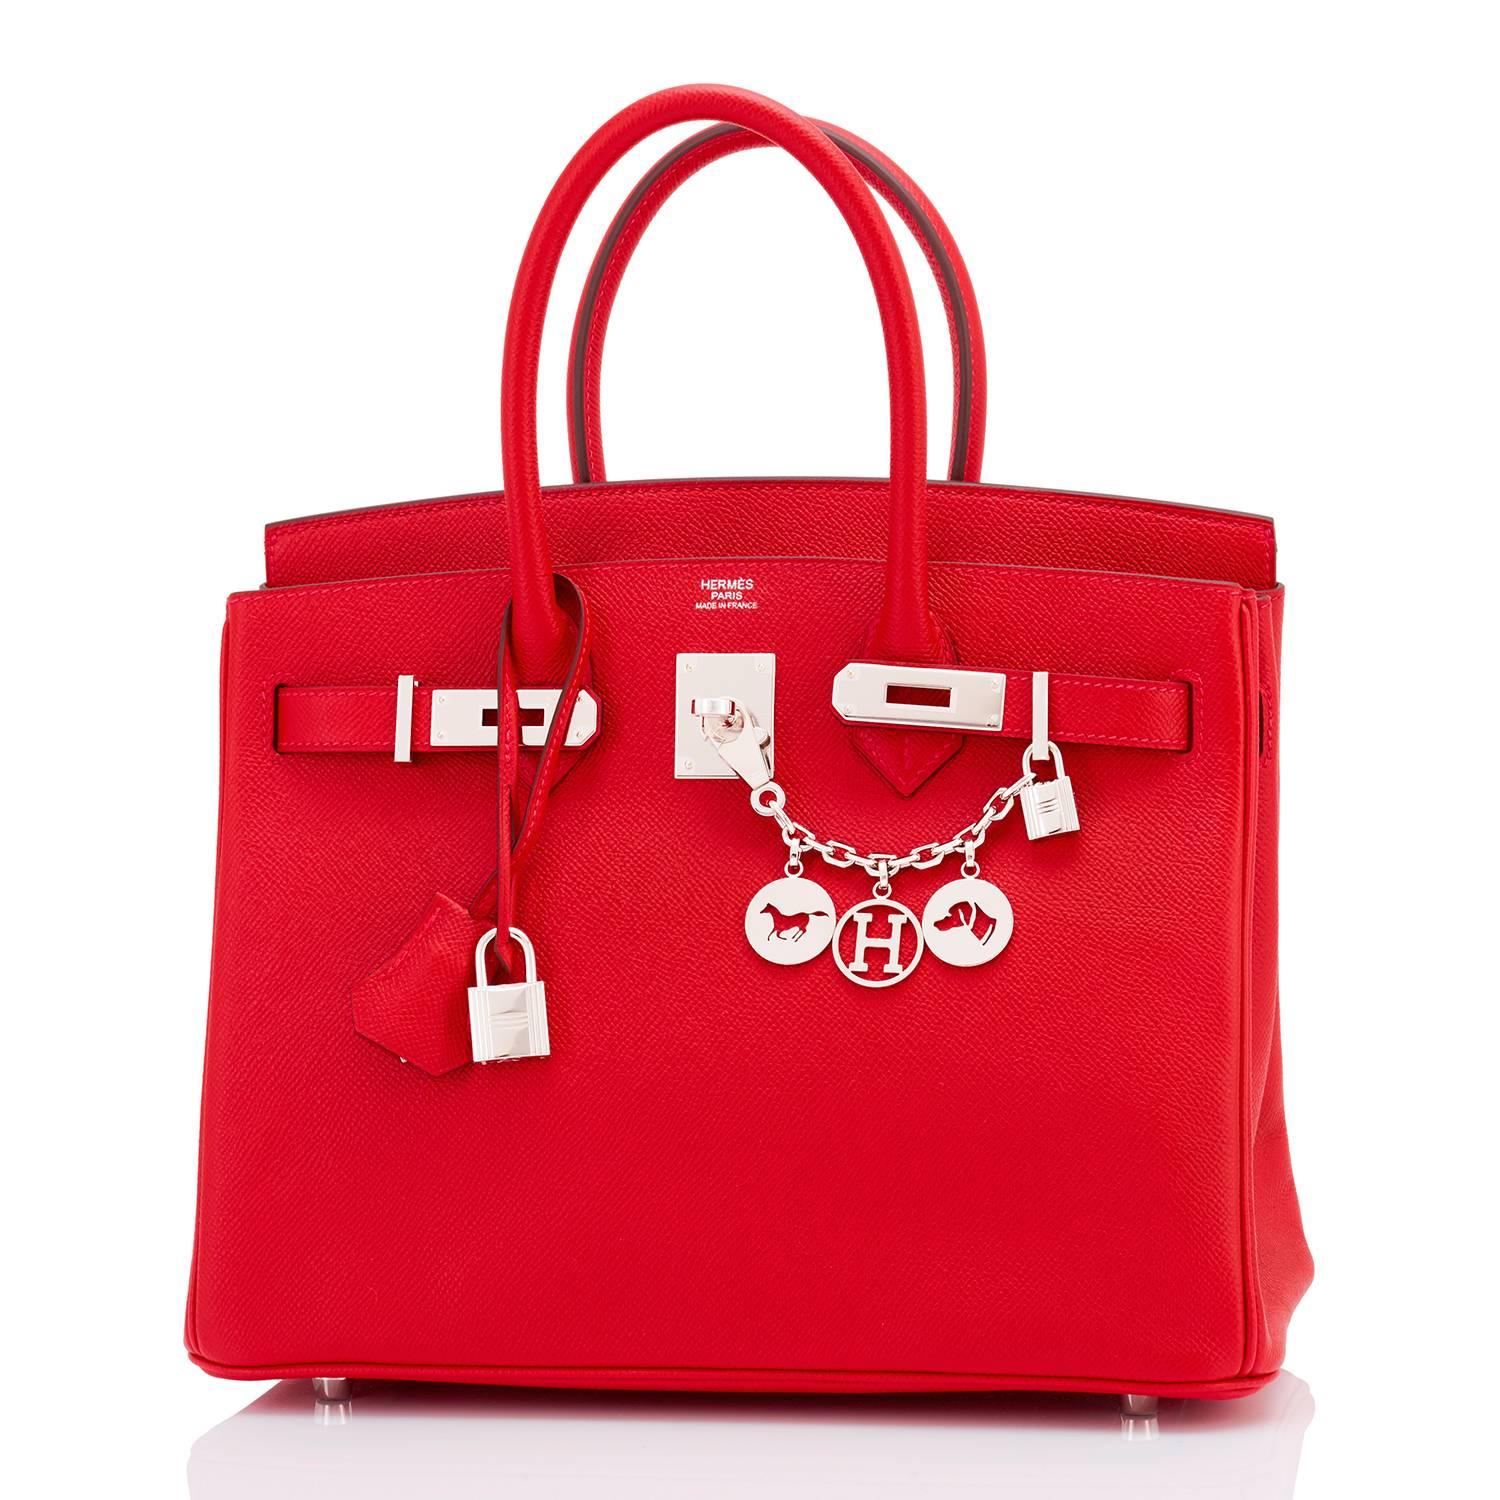 Hermes Birkin Bag 30cm Rouge Casaque Epsom Palladium Hardware
Brand New in Box.  Store fresh. Pristine condition (with plastic on hardware).
Just purchased from Hermes store; bag bears new 2017 interior A stamp.
Perfect gift! Coming full set with